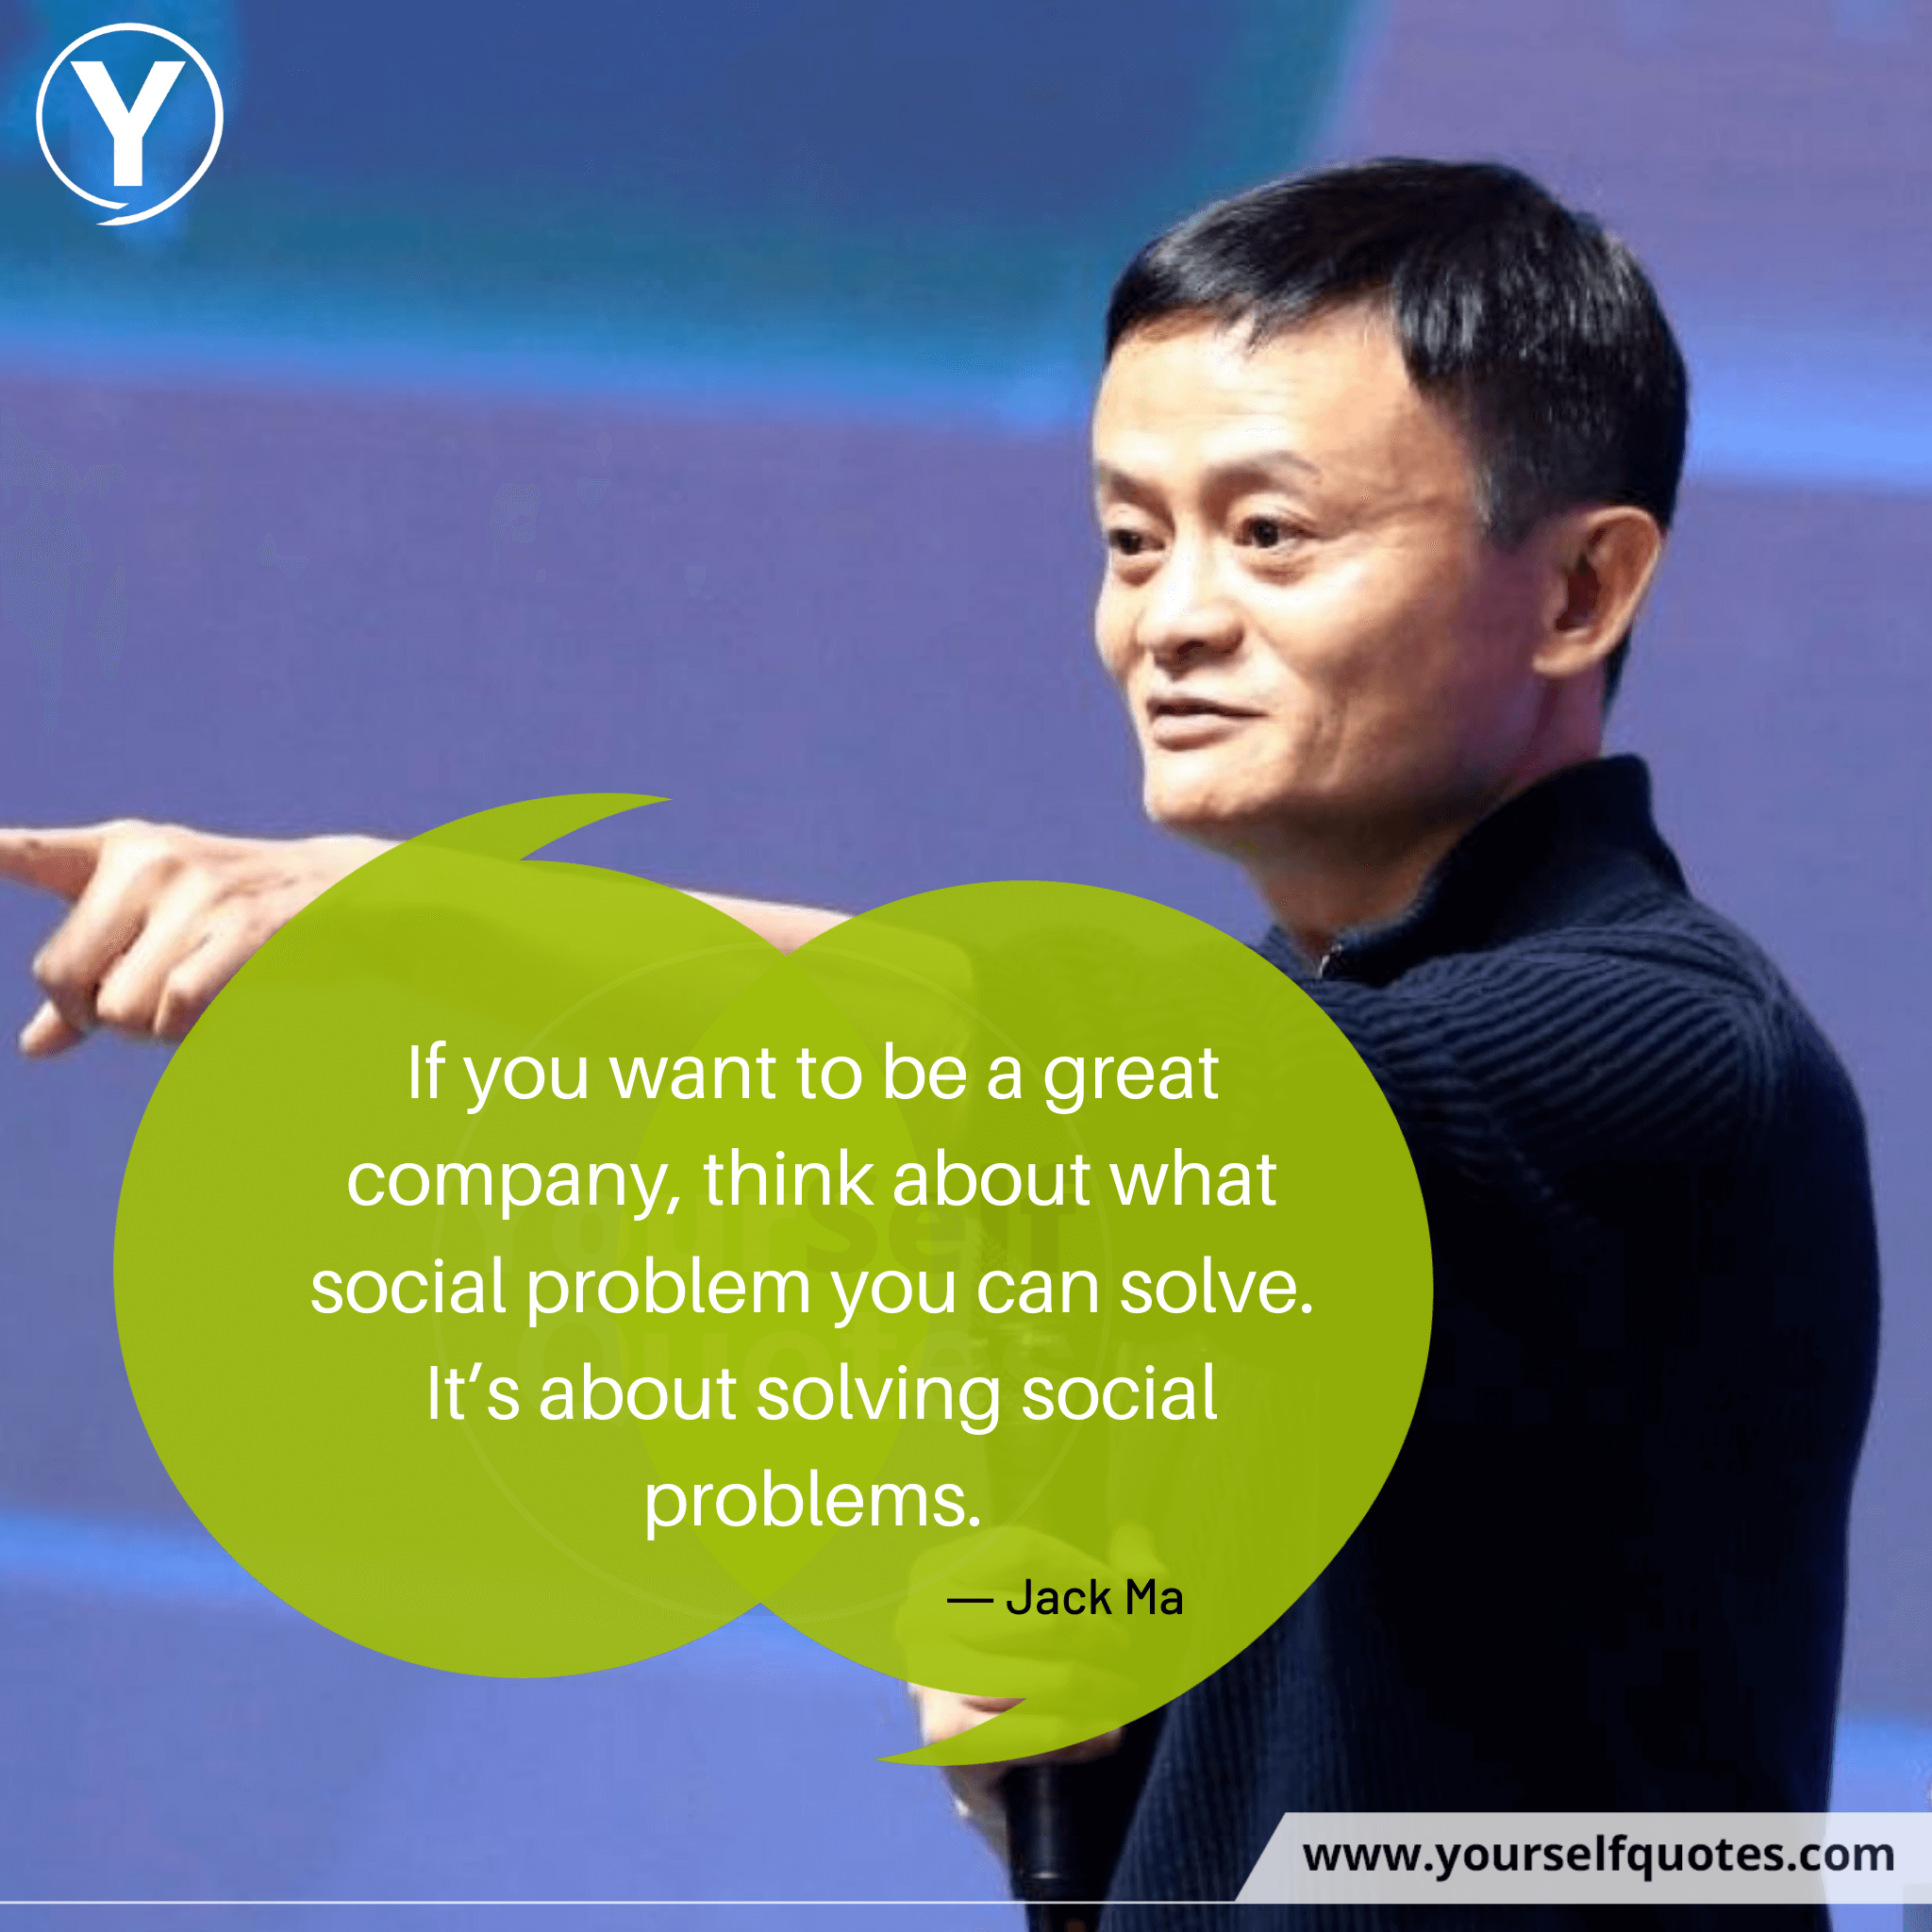 Quotes Jack Ma images